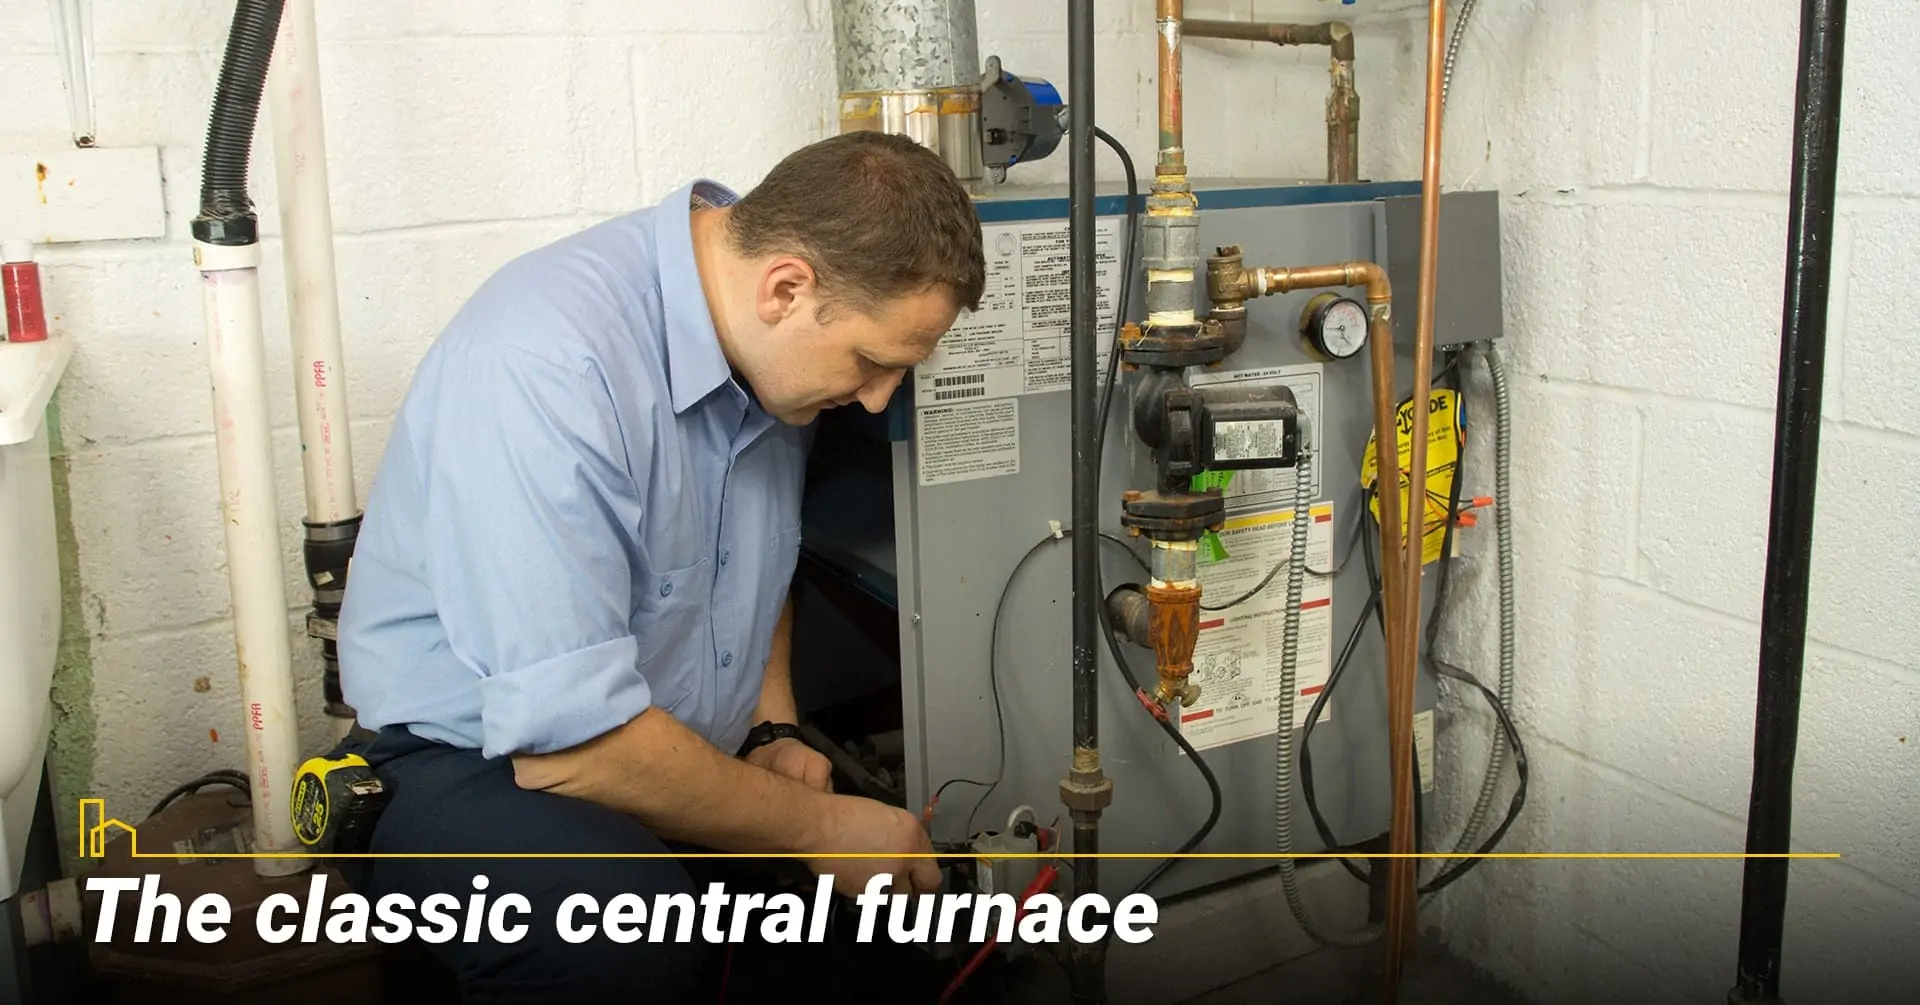 The classic central furnace, heat your home with central furnace